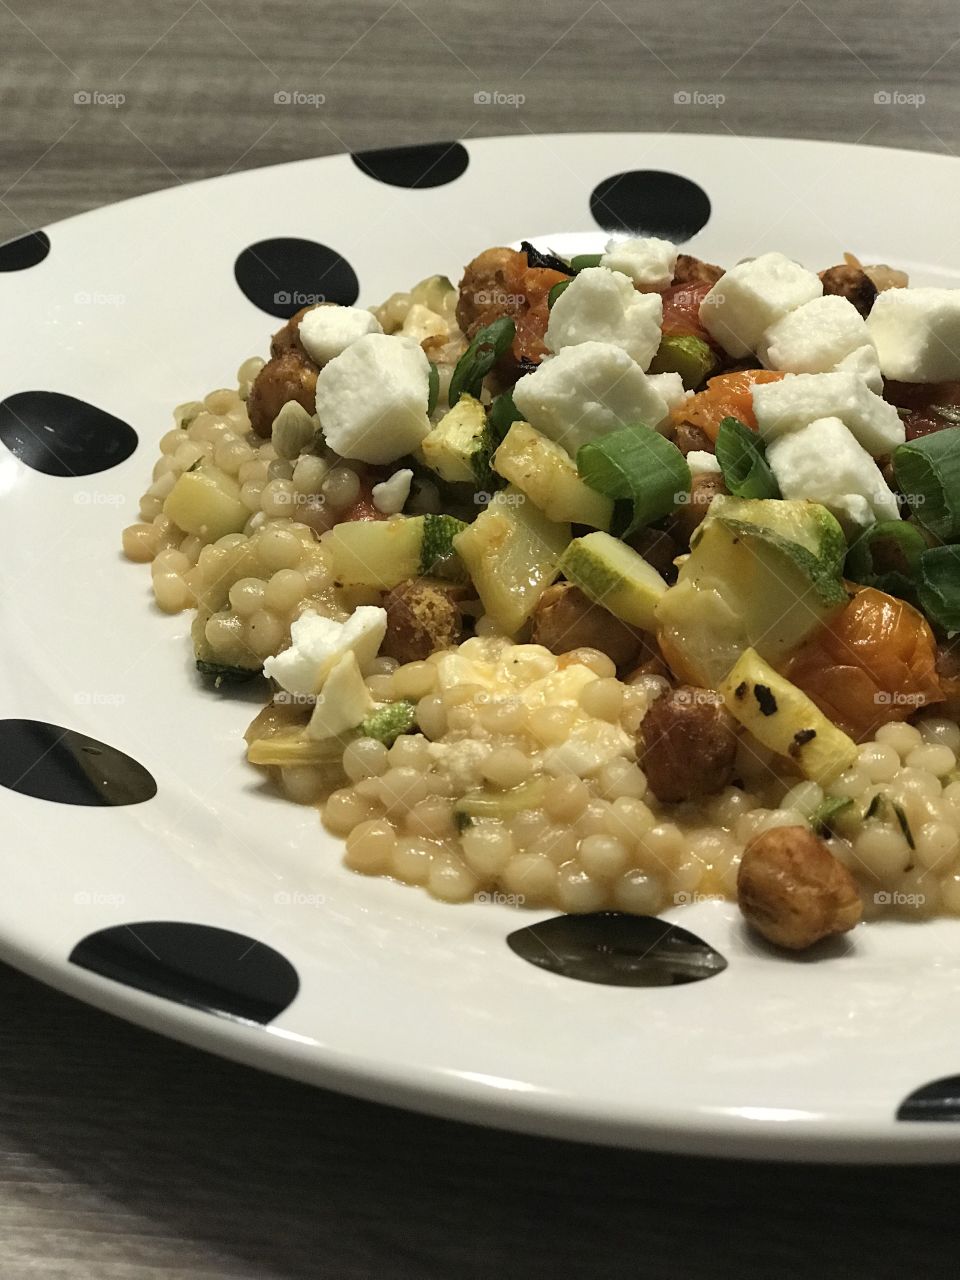 Close up of couscous dish with vegetables plated for dinner